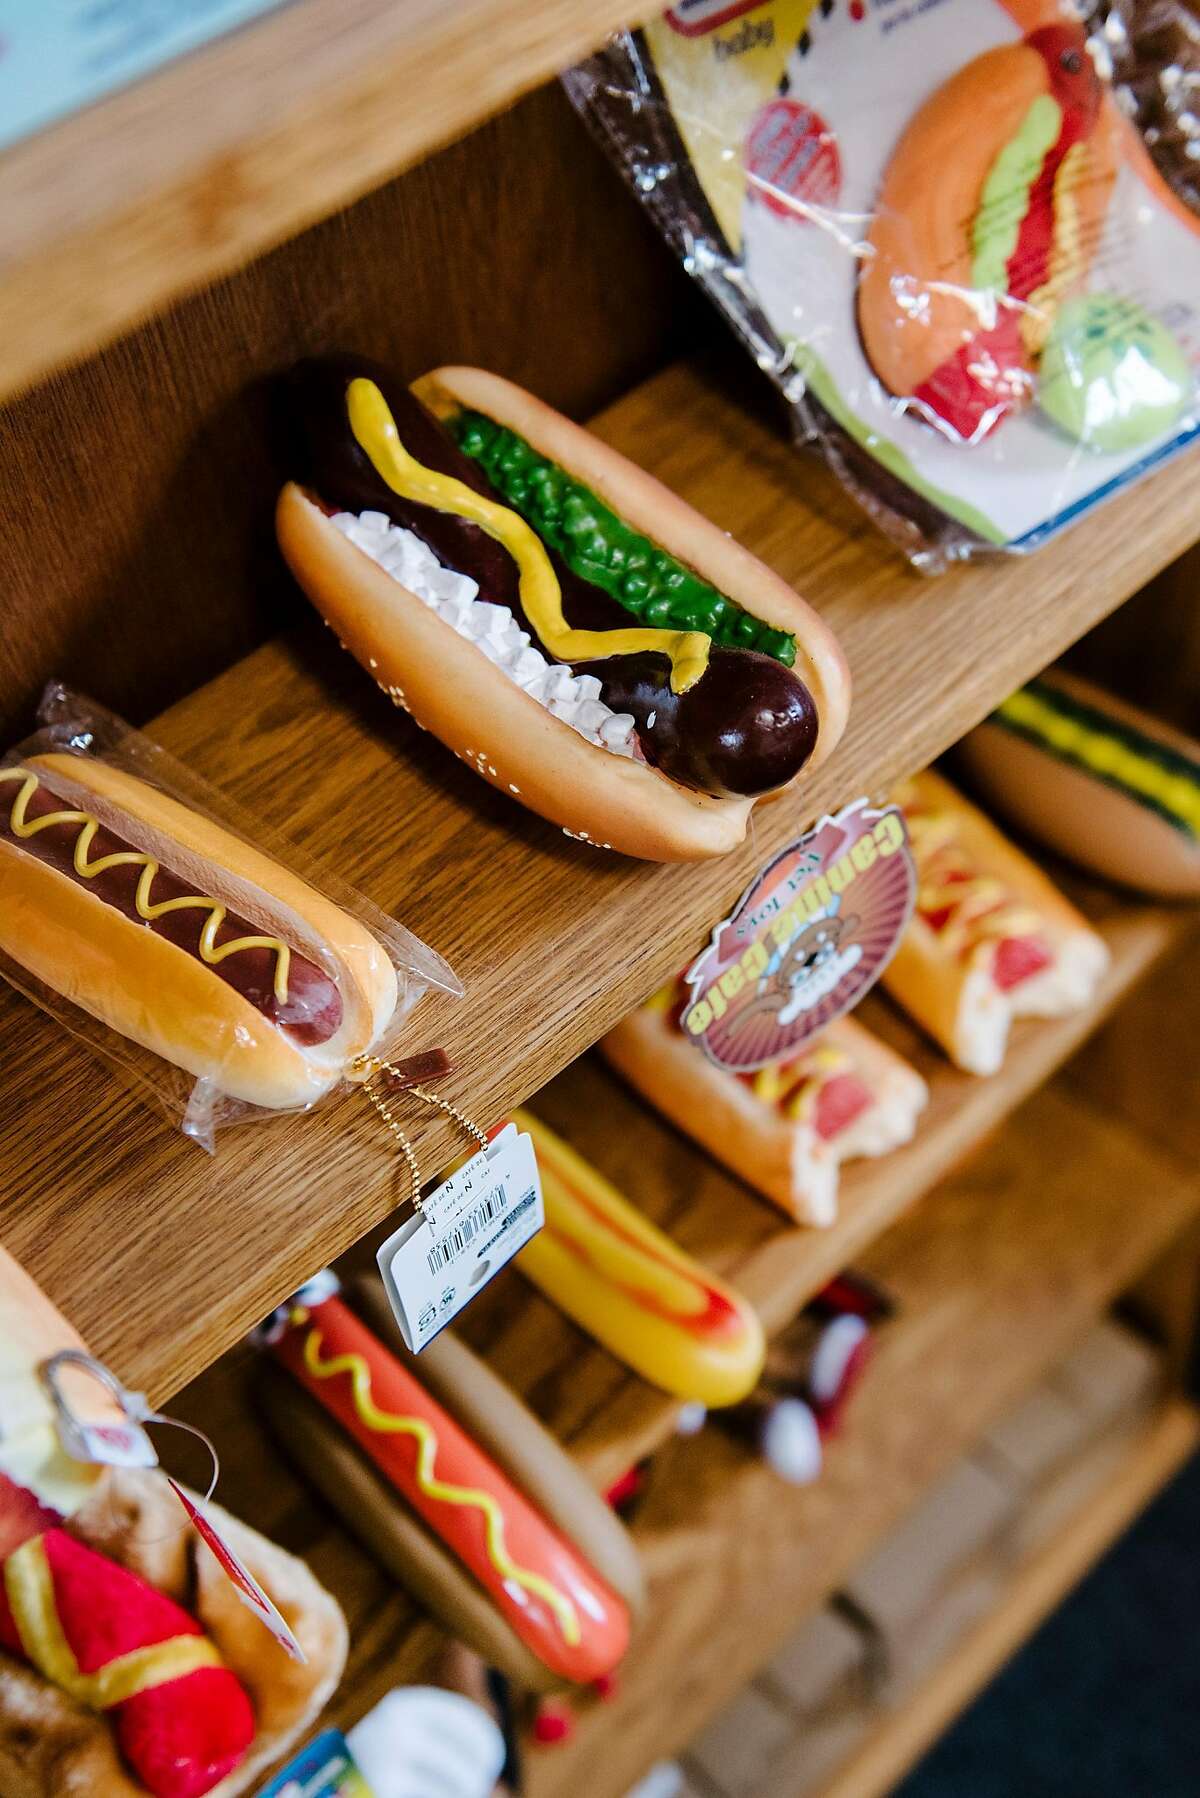 Hotdog themed items line the walls of Kip Atchley's office in Napa, Calif., on July 5th, 2019. Napa resident Kip Atchley wants to resurrect Doggie Diner, the fast-food chain that maintained locations in San Francisco and Oakland from the 1940s to the 1980s